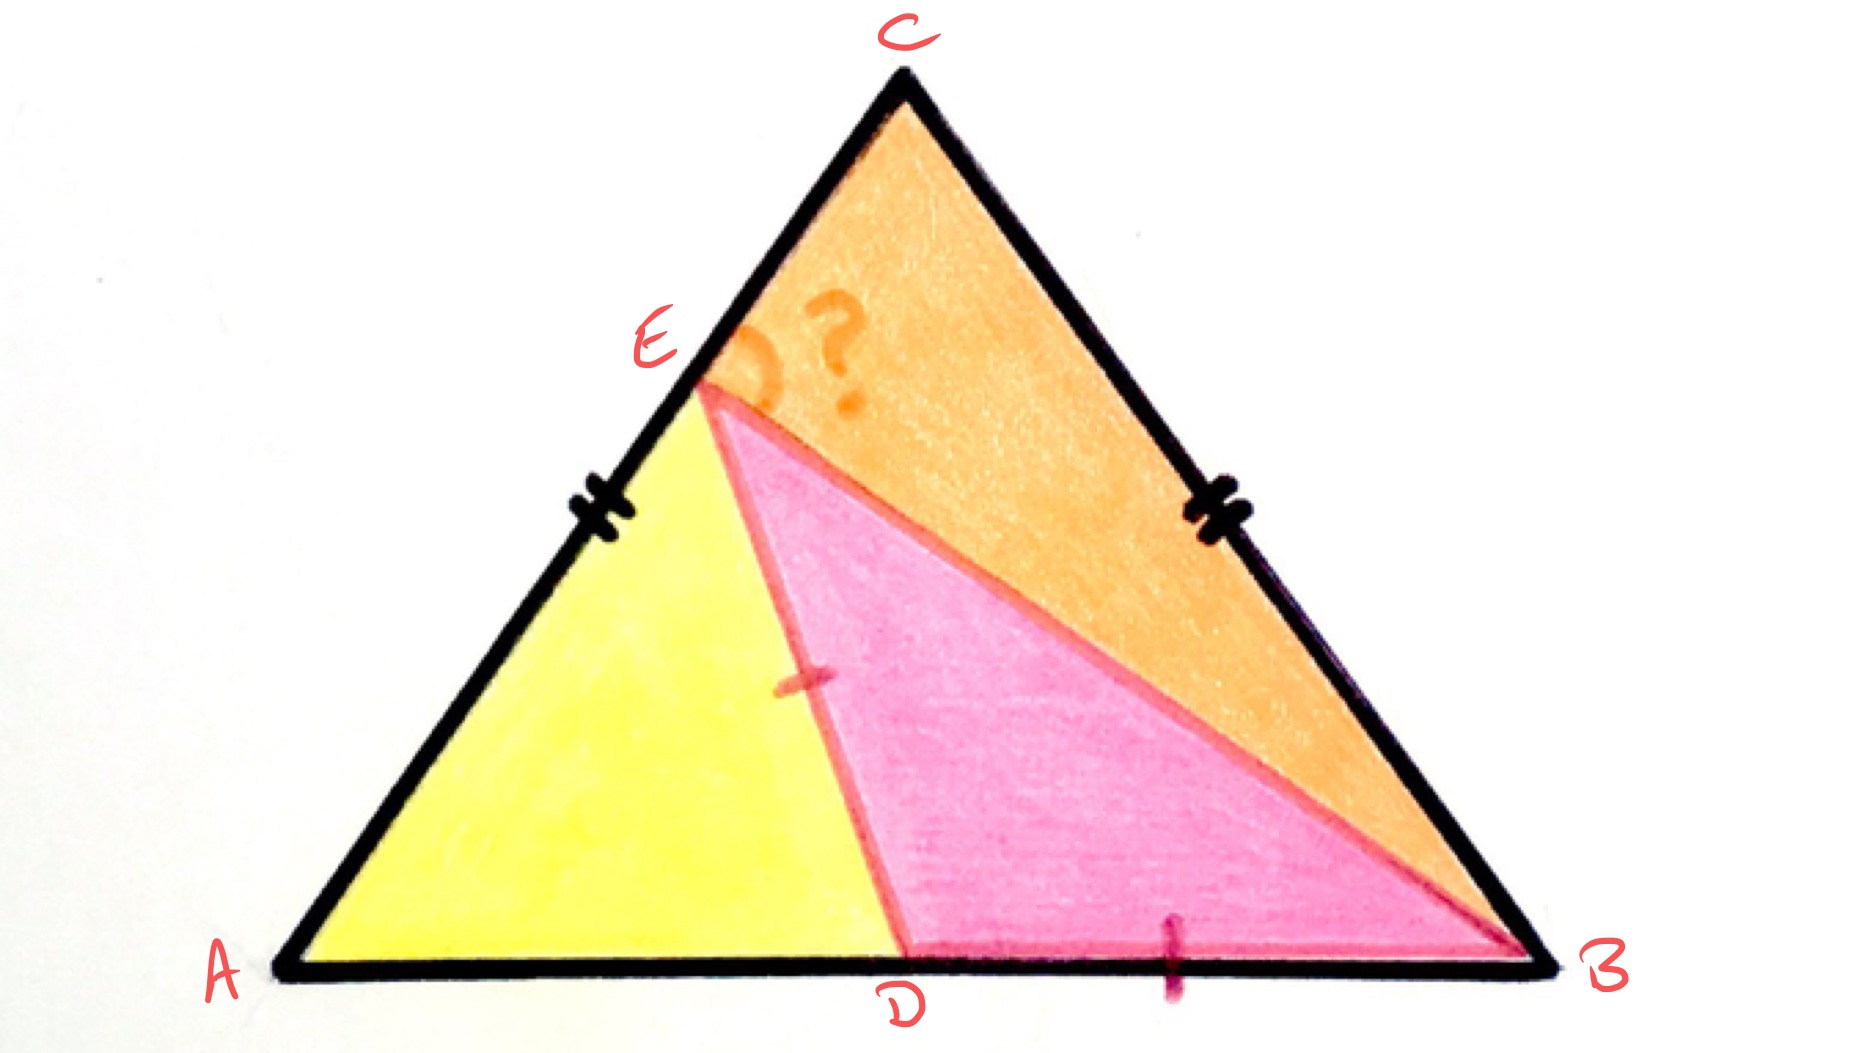 Nested isosceles triangles labelled